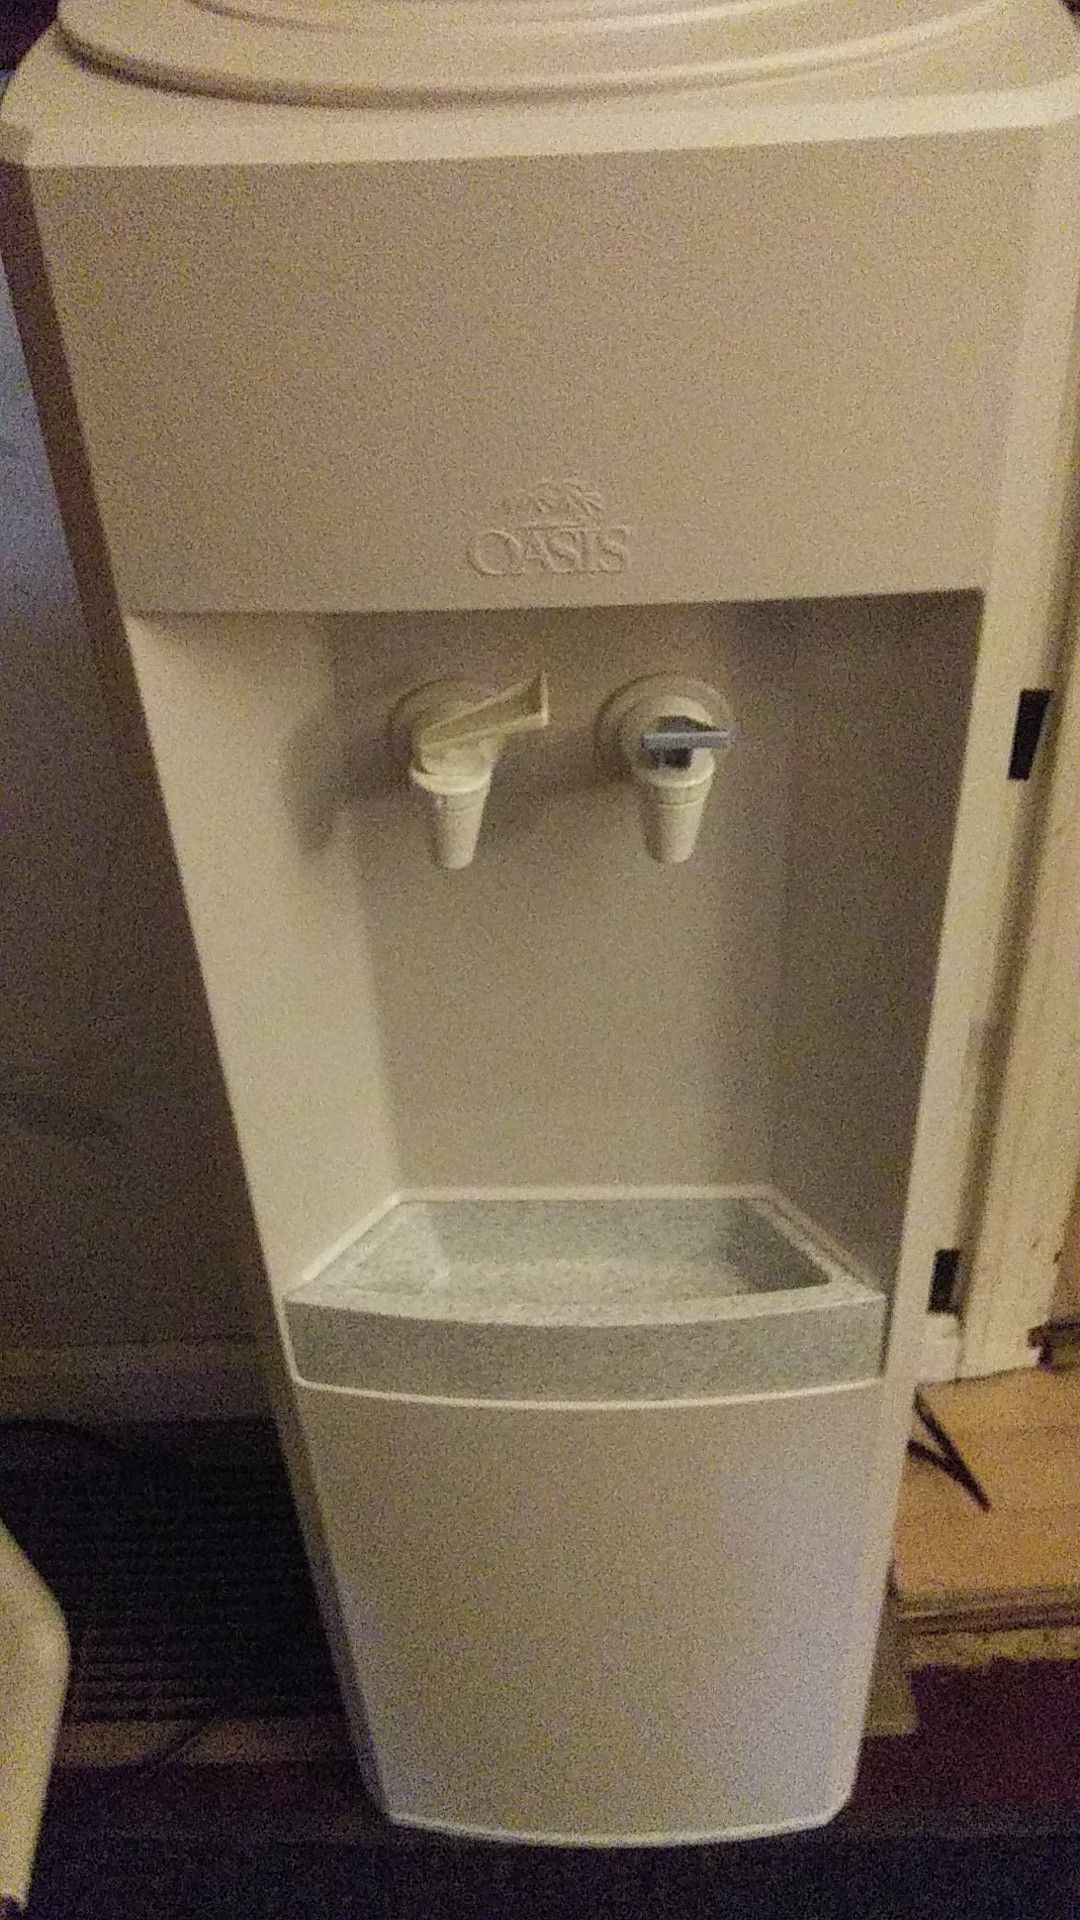 Oasis water cooler brand new